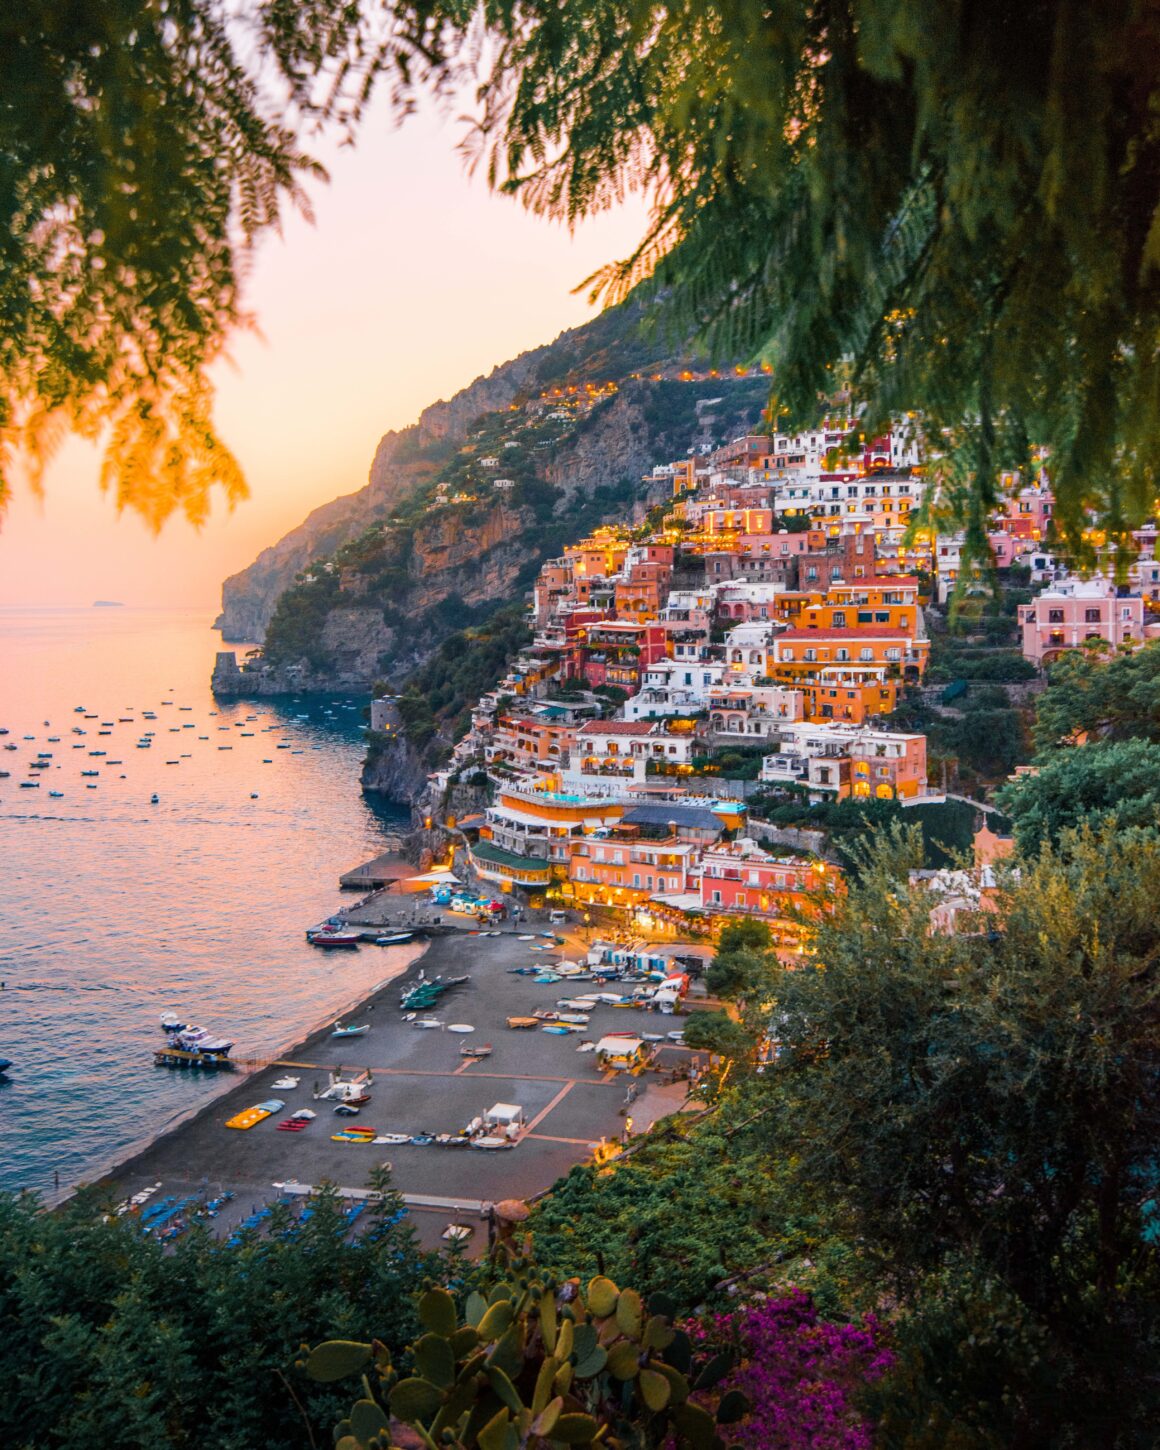 Positano at sunset, one of the best places to visit on the Amalfi Coast